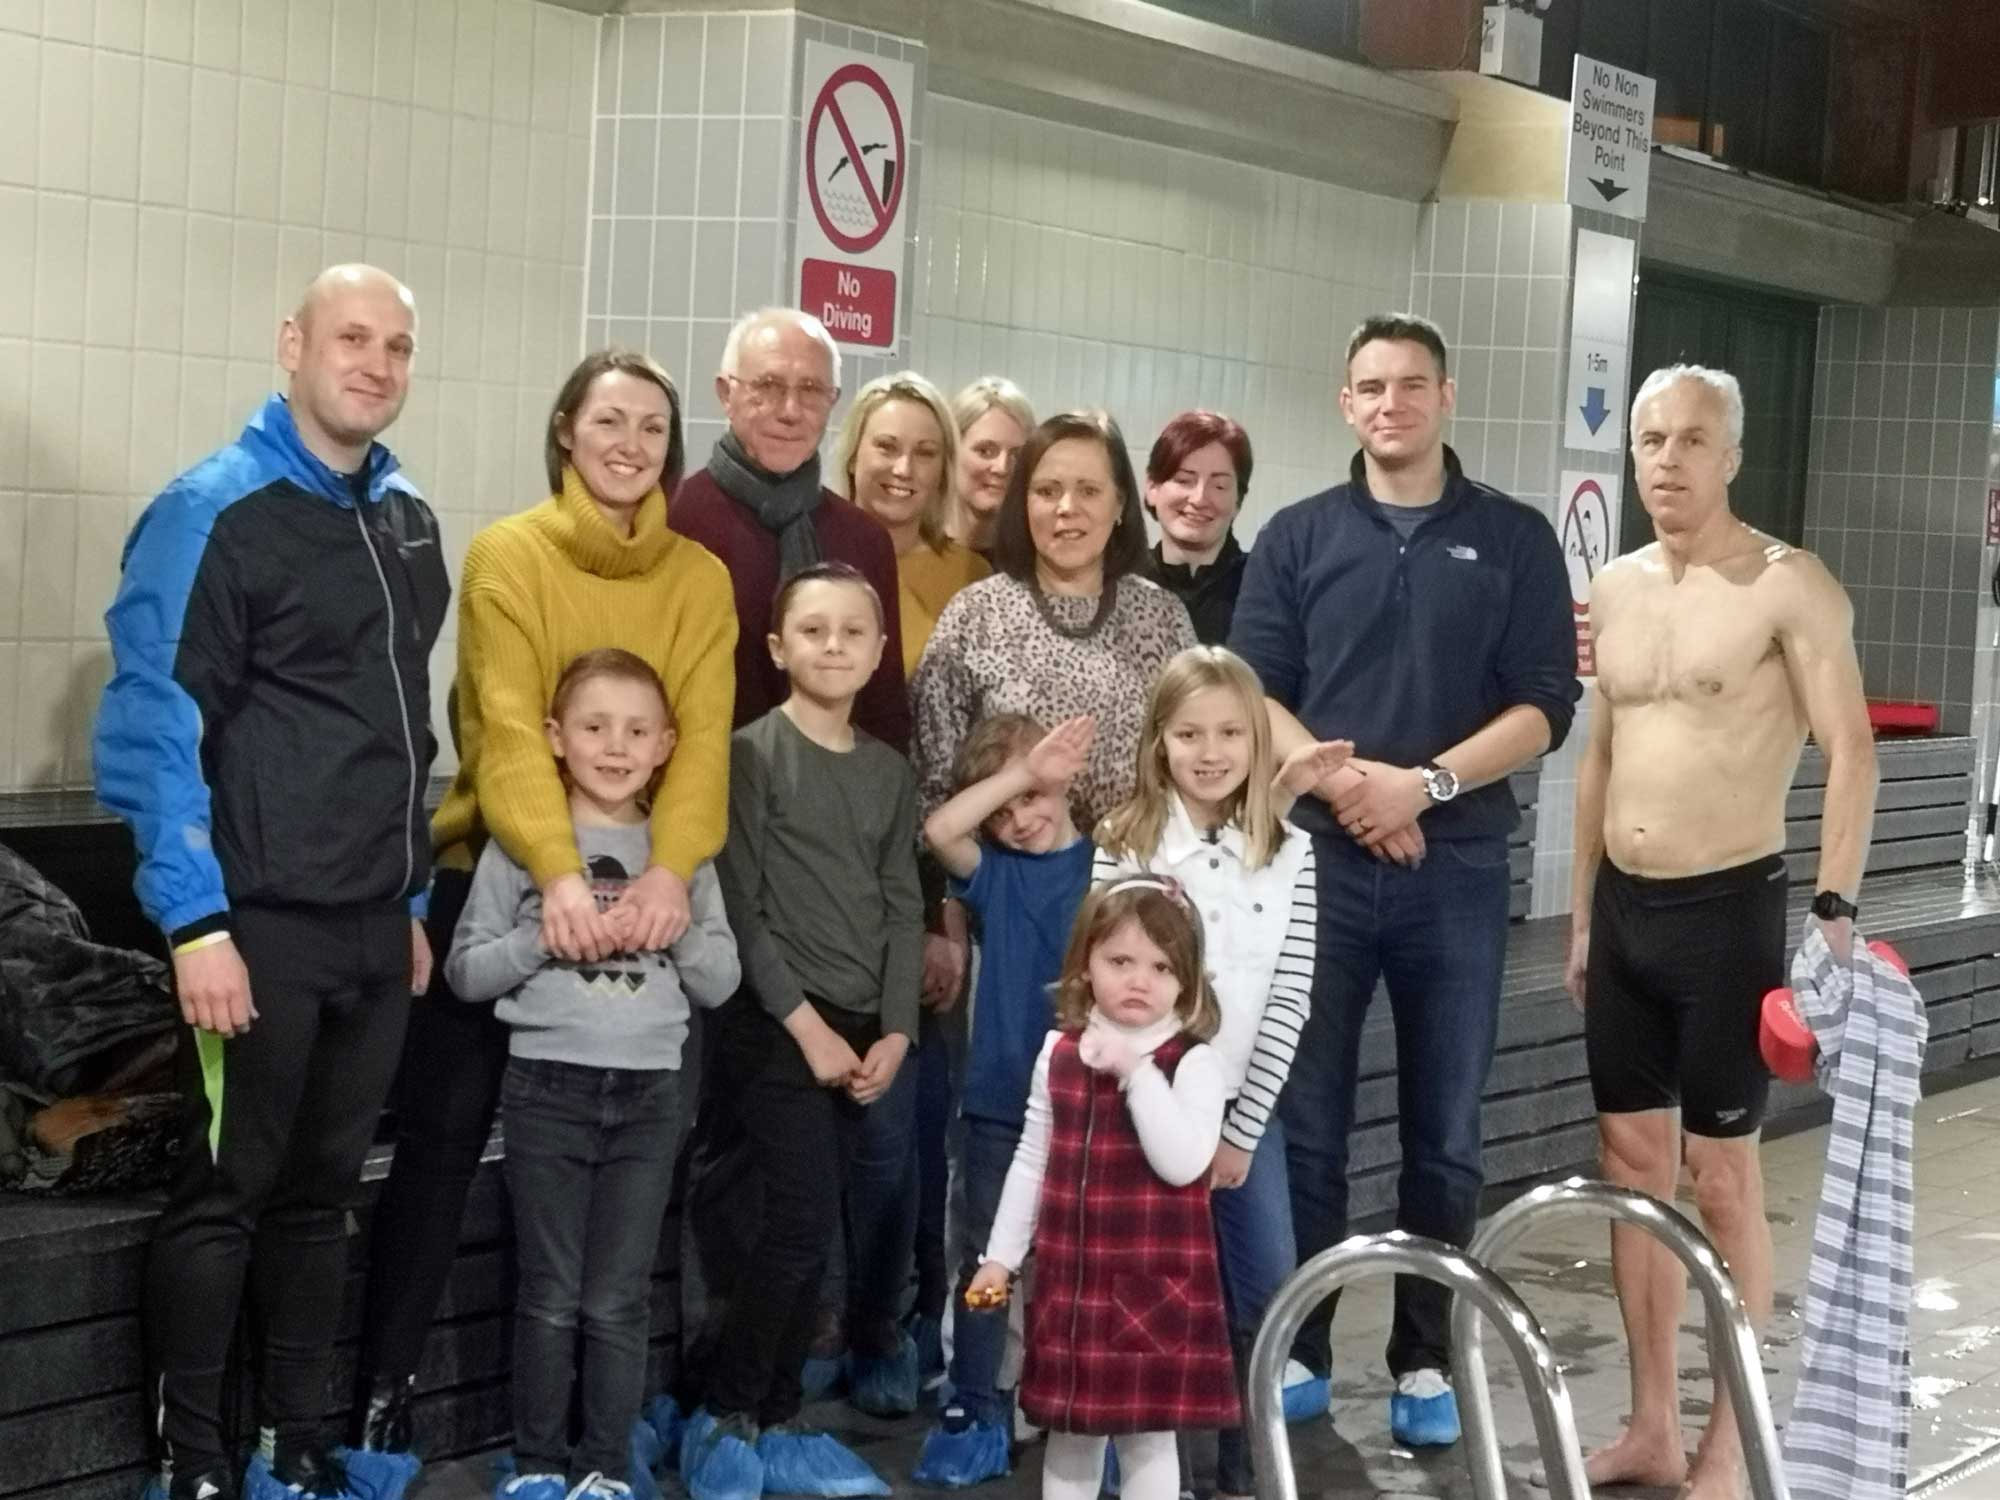 Paul with PC Bramma’s family and friends at the end of the swim